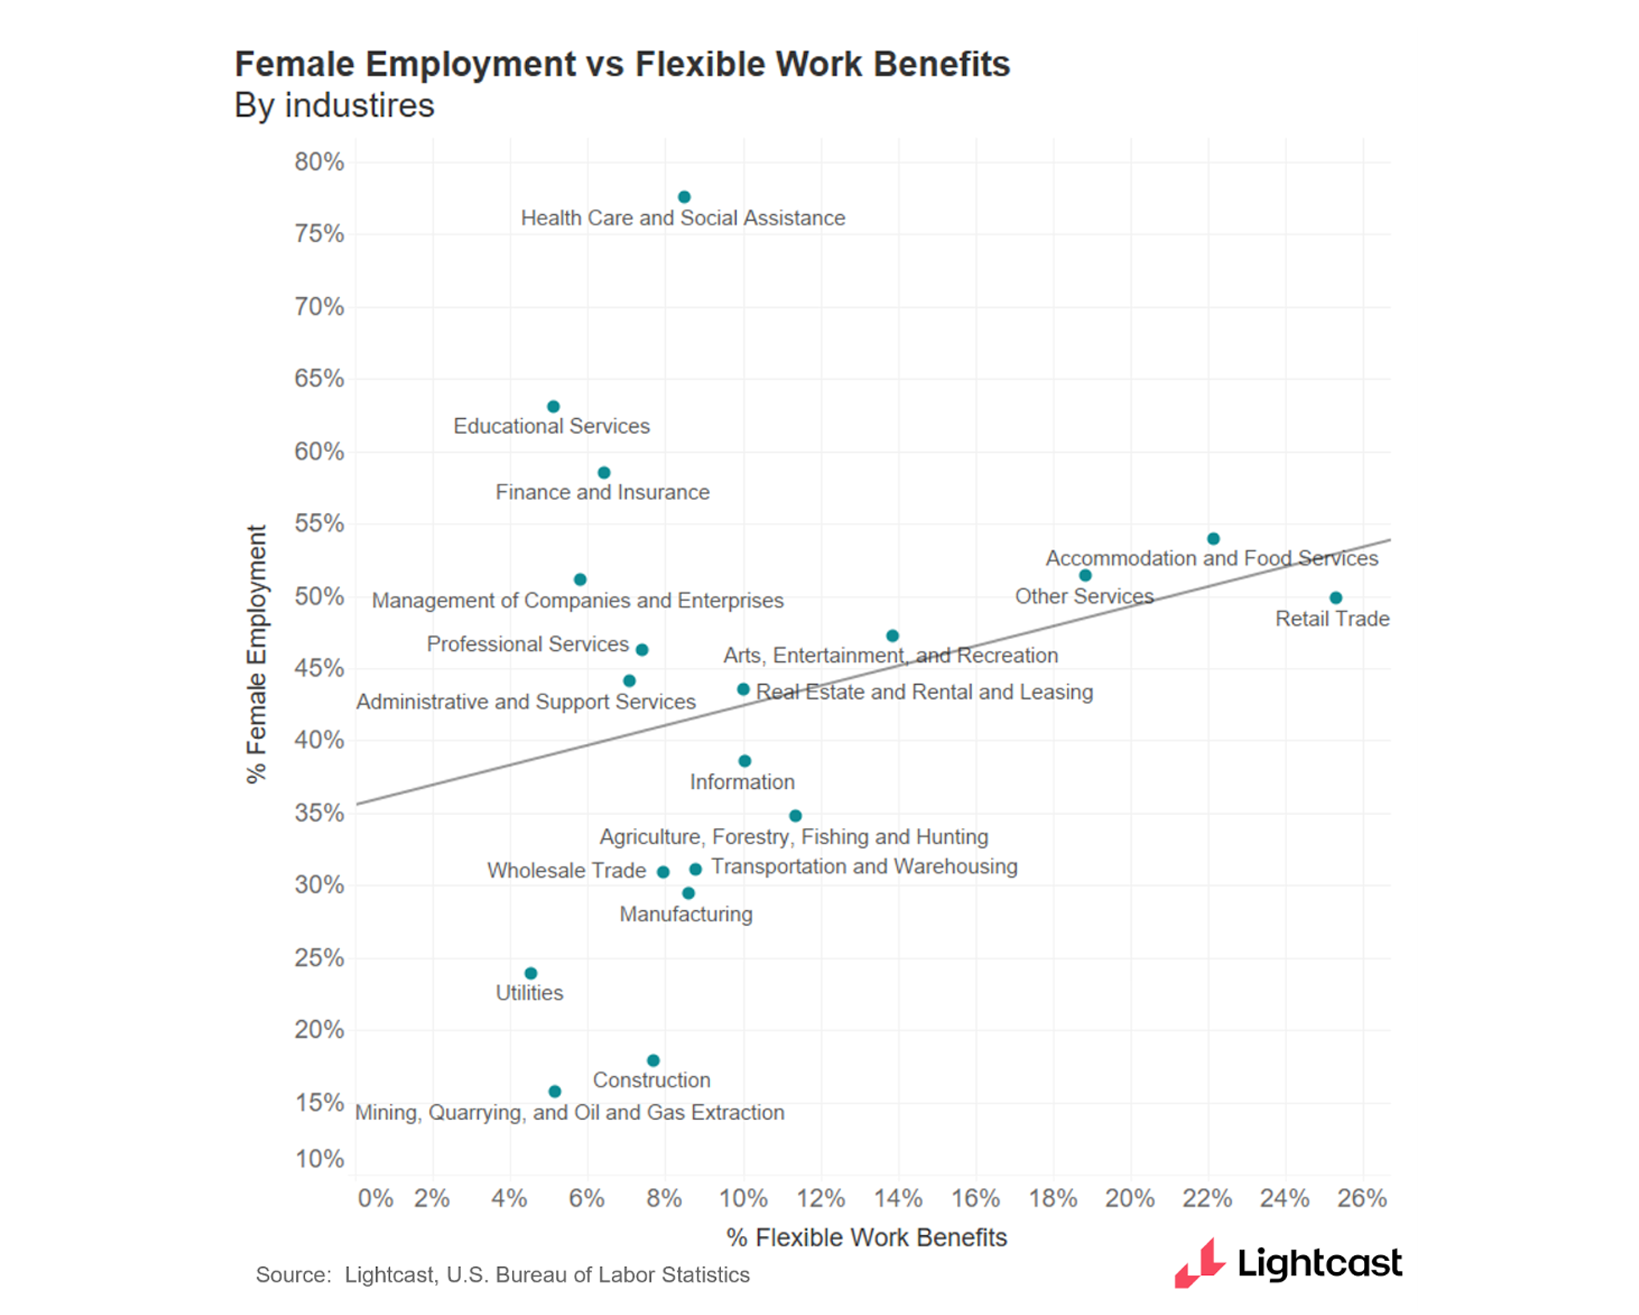 Graph showing female employment compared to flexible work benefits, with a positive correlation